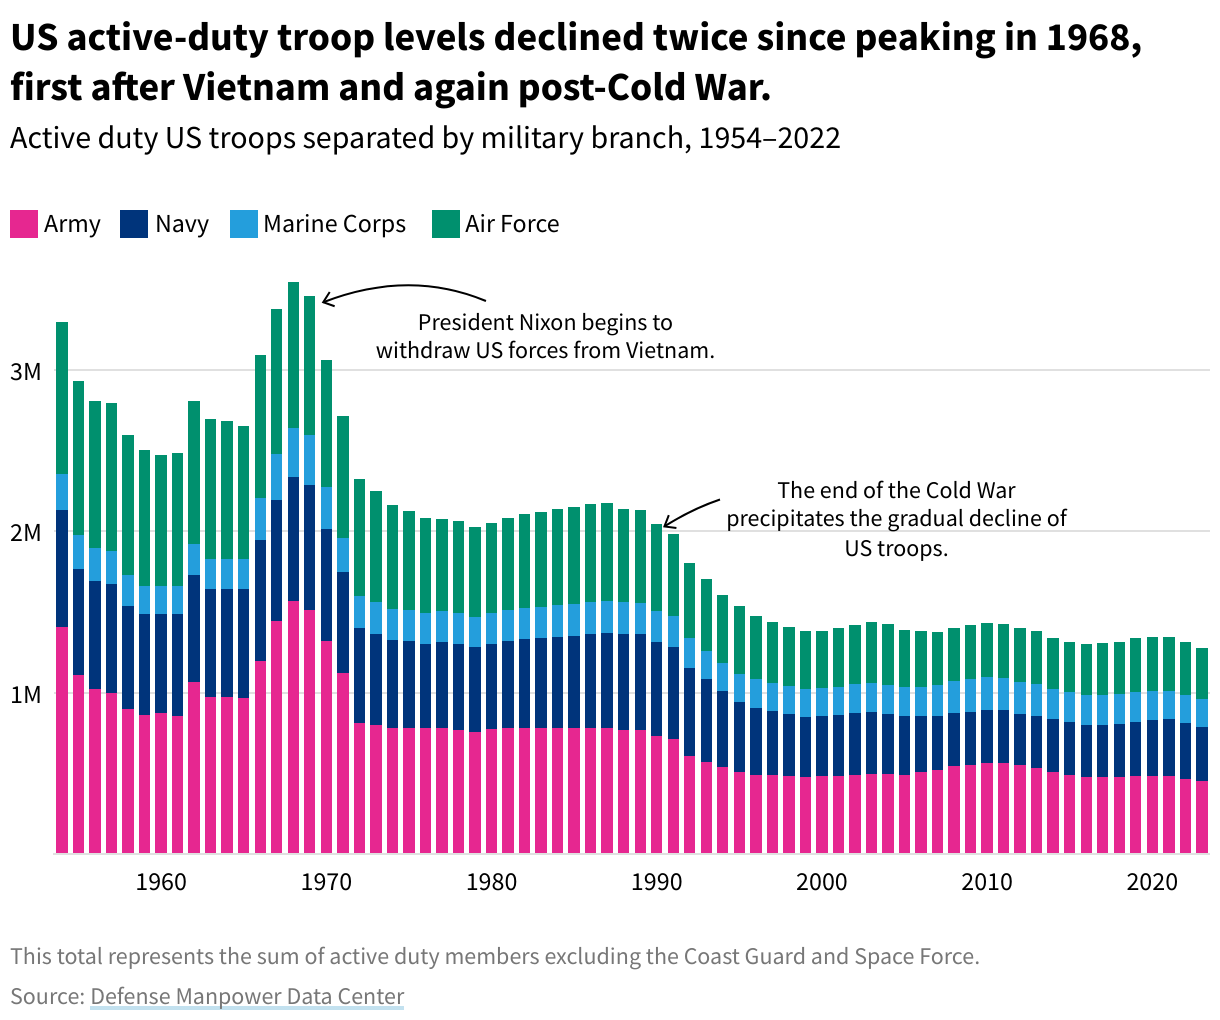 A column chart showing the change in active US troops by military branch between 1954 and 2022.